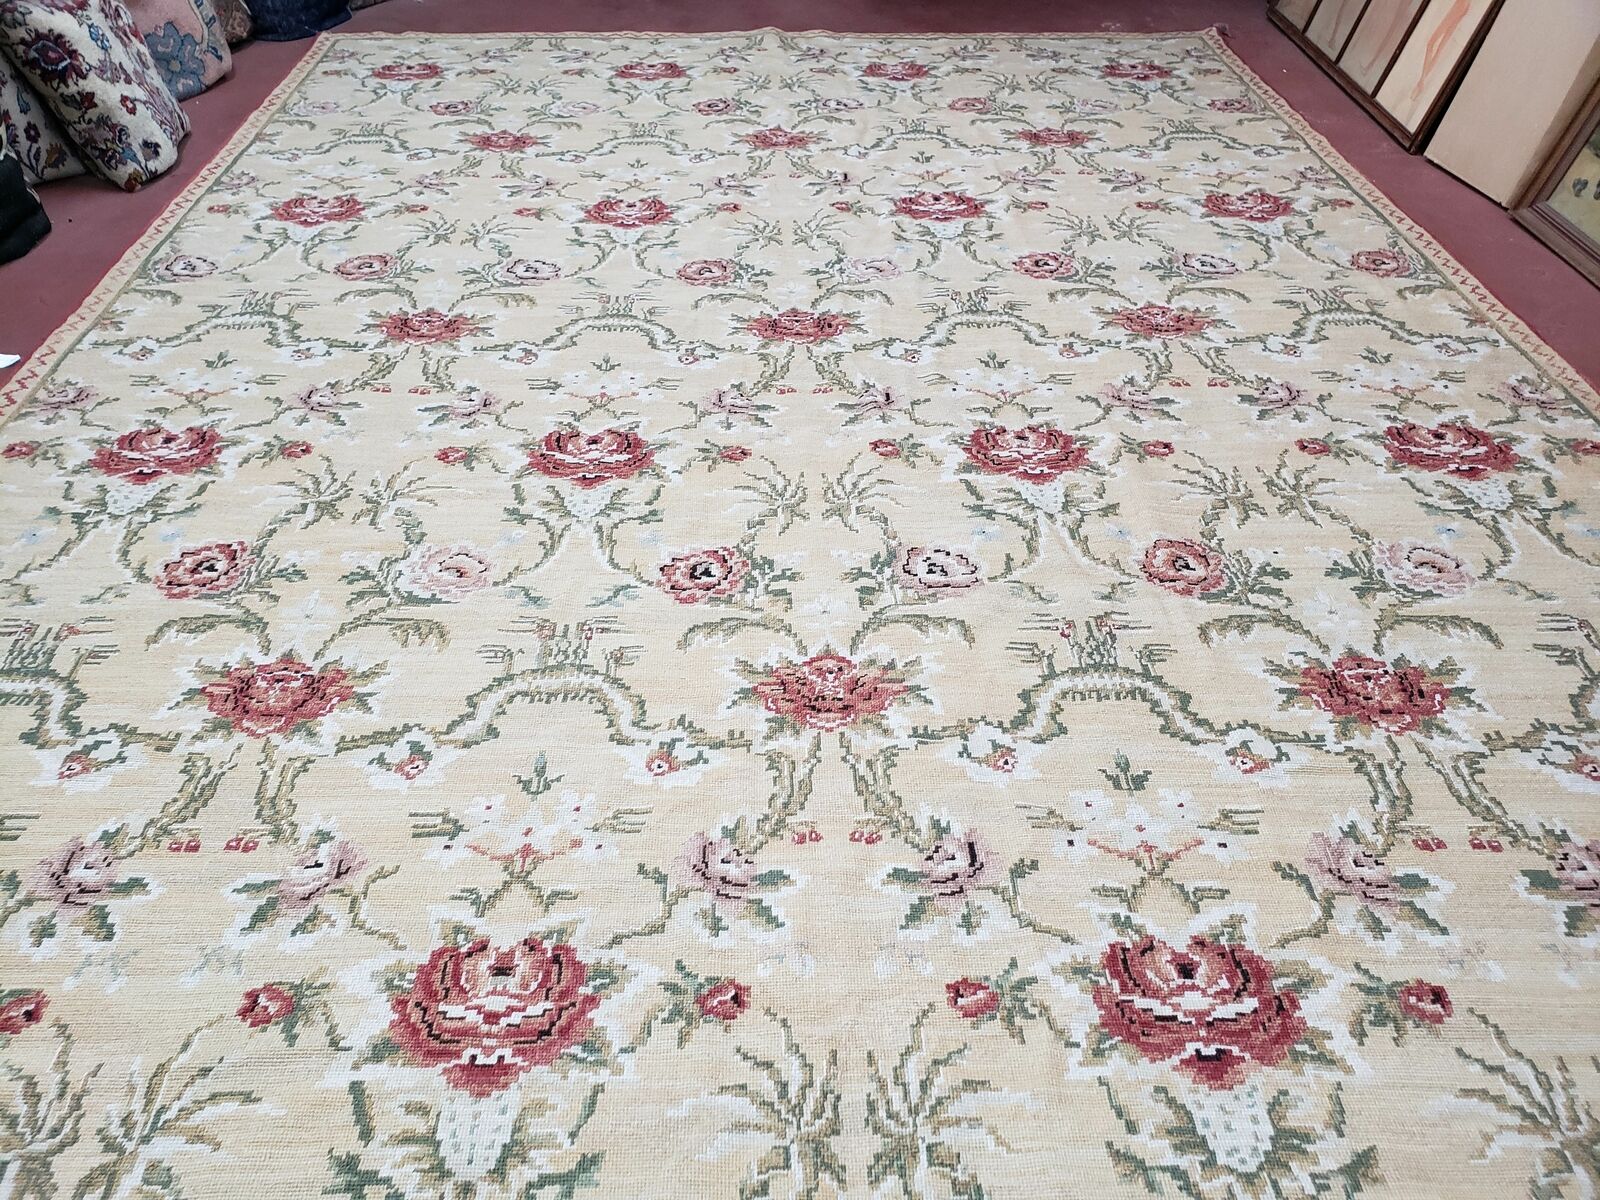 Needlepoint Rug 9x13 - 10x14 Flatweave English Allover Floral Pale Yellow Large